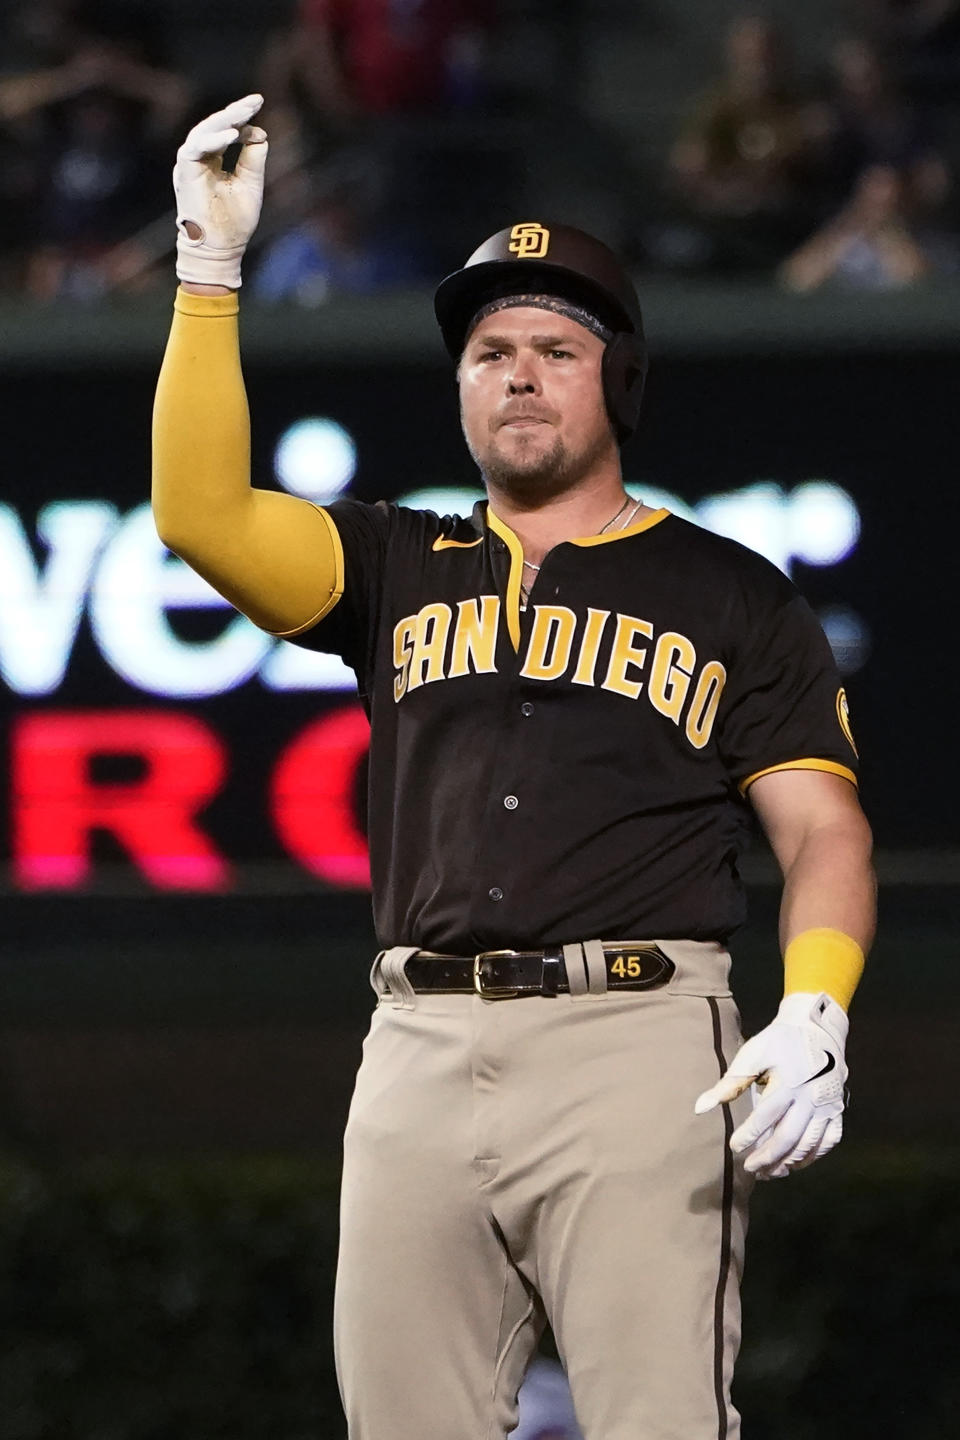 San Diego Padres' Luke Voit gestures after his three-run double off Chicago Cubs relief pitcher Mychal Givens during the seventh inning of a baseball game Tuesday, June 14, 2022, in Chicago. (AP Photo/Charles Rex Arbogast)